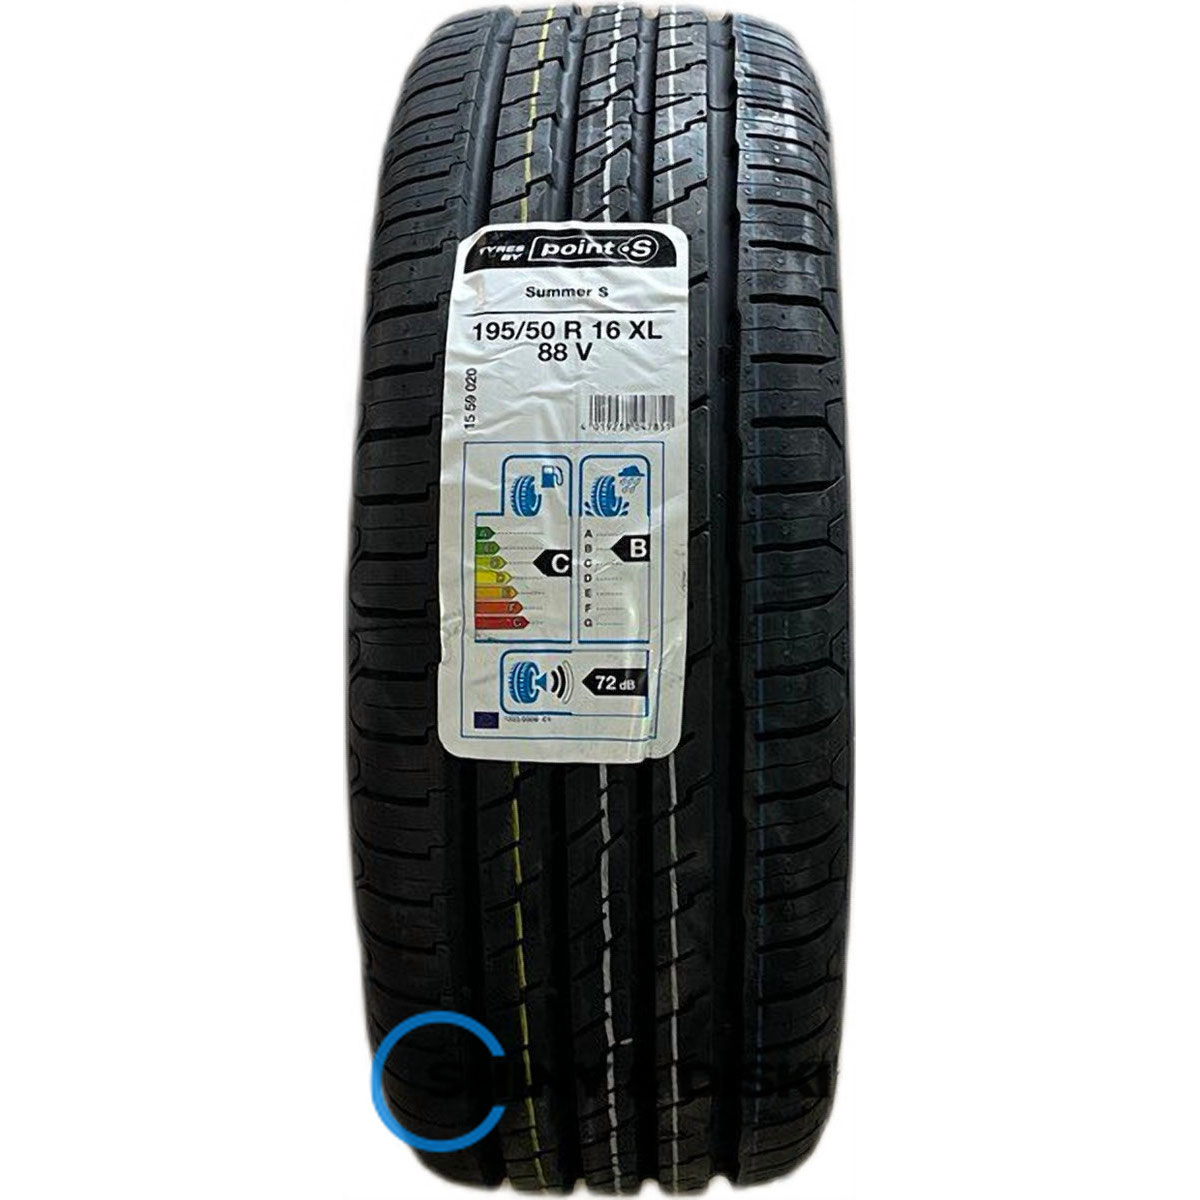 покрышки point s summer 205/55 r17 95v fr